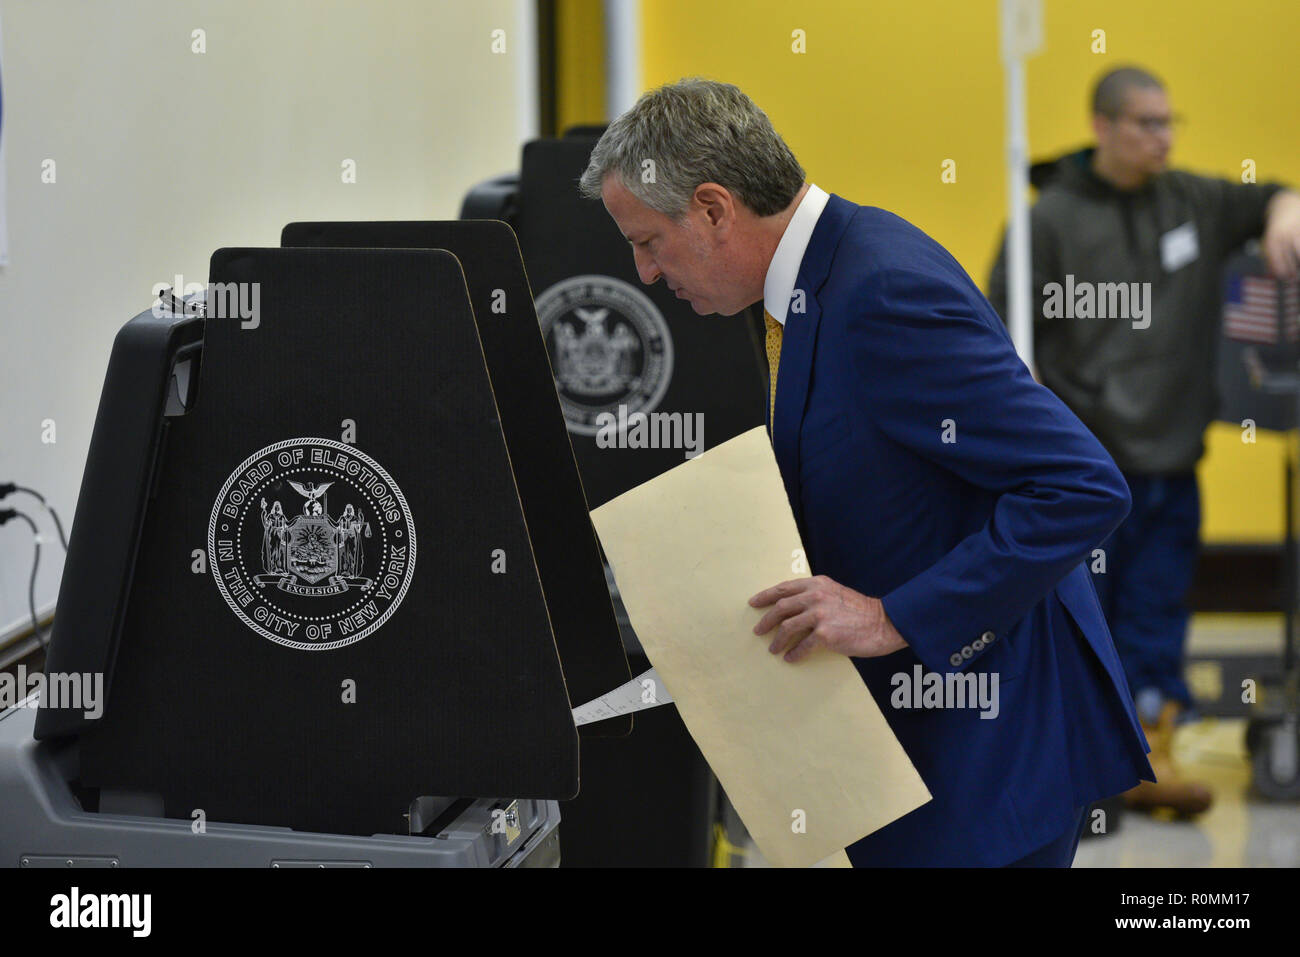 New York, USA. 6th November, 2018. Mayor Bill de Blasio casts his vote during the Midterm Elections in the Park Slope section of Brooklyn, New York on November 6, 2018. Credit: Erik Pendzich/Alamy Live News Stock Photo